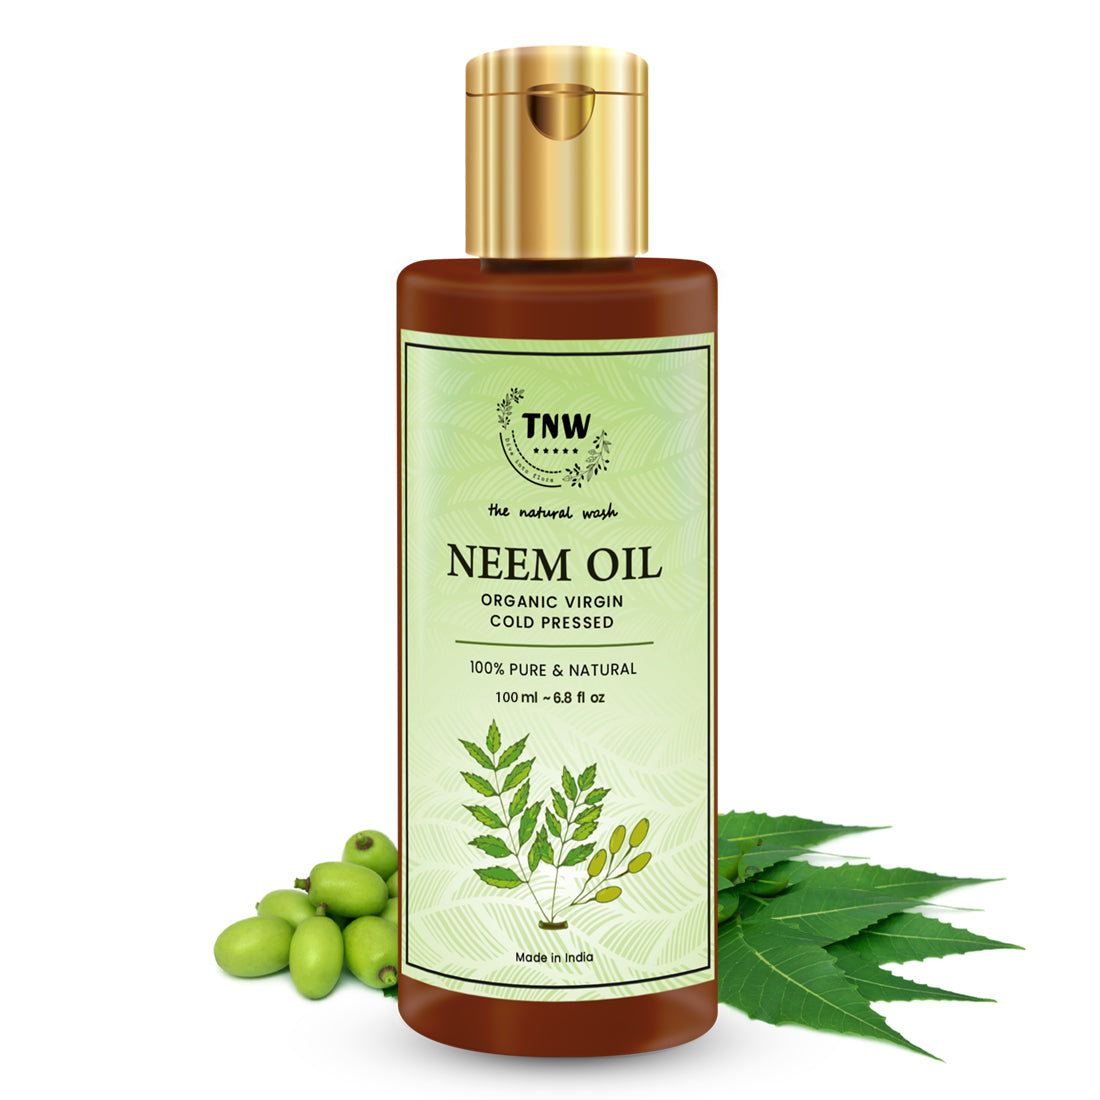 Neem oil For Skin & Hair – The Natural Wash